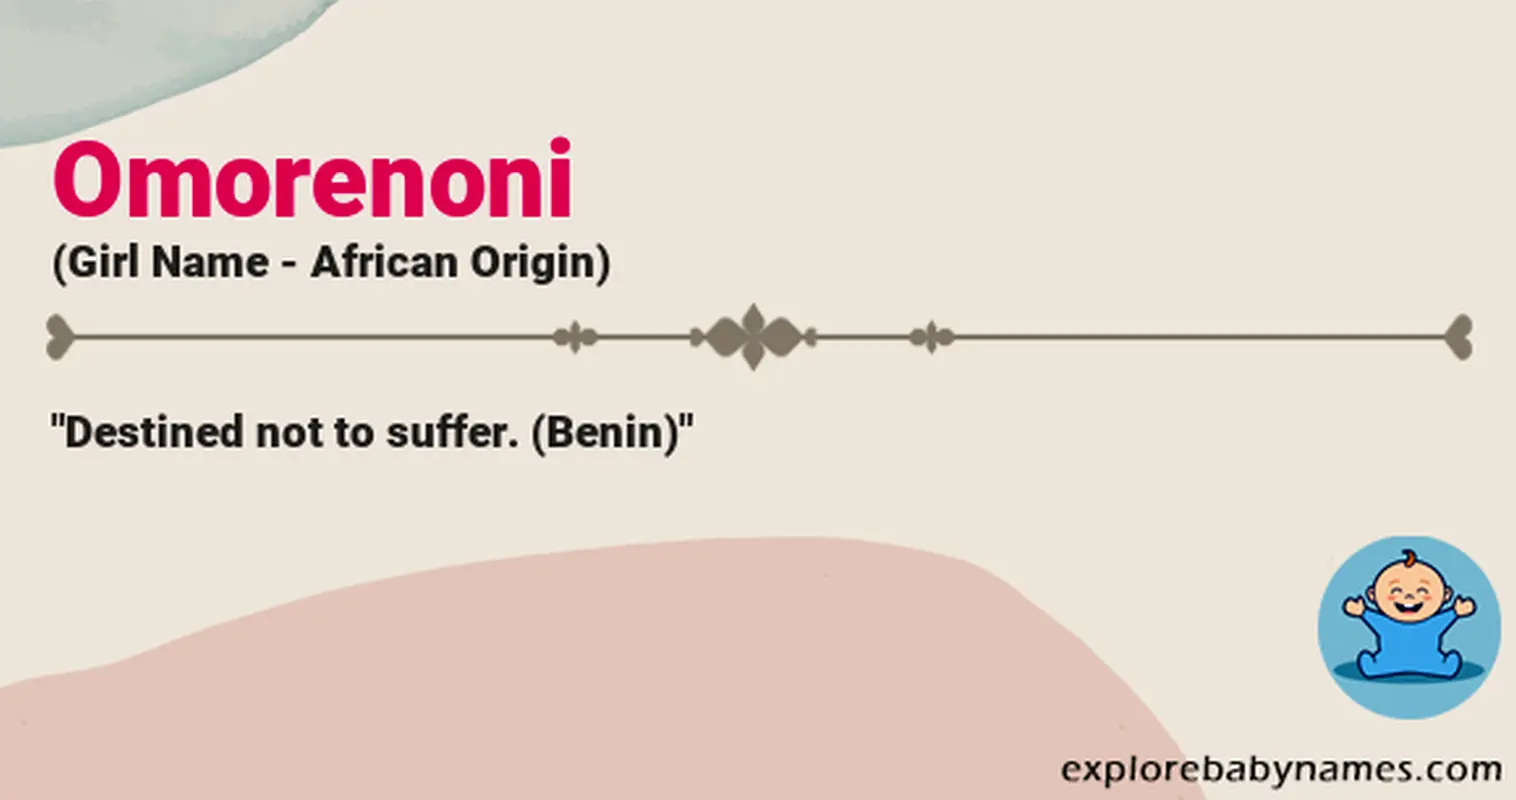 Meaning of Omorenoni